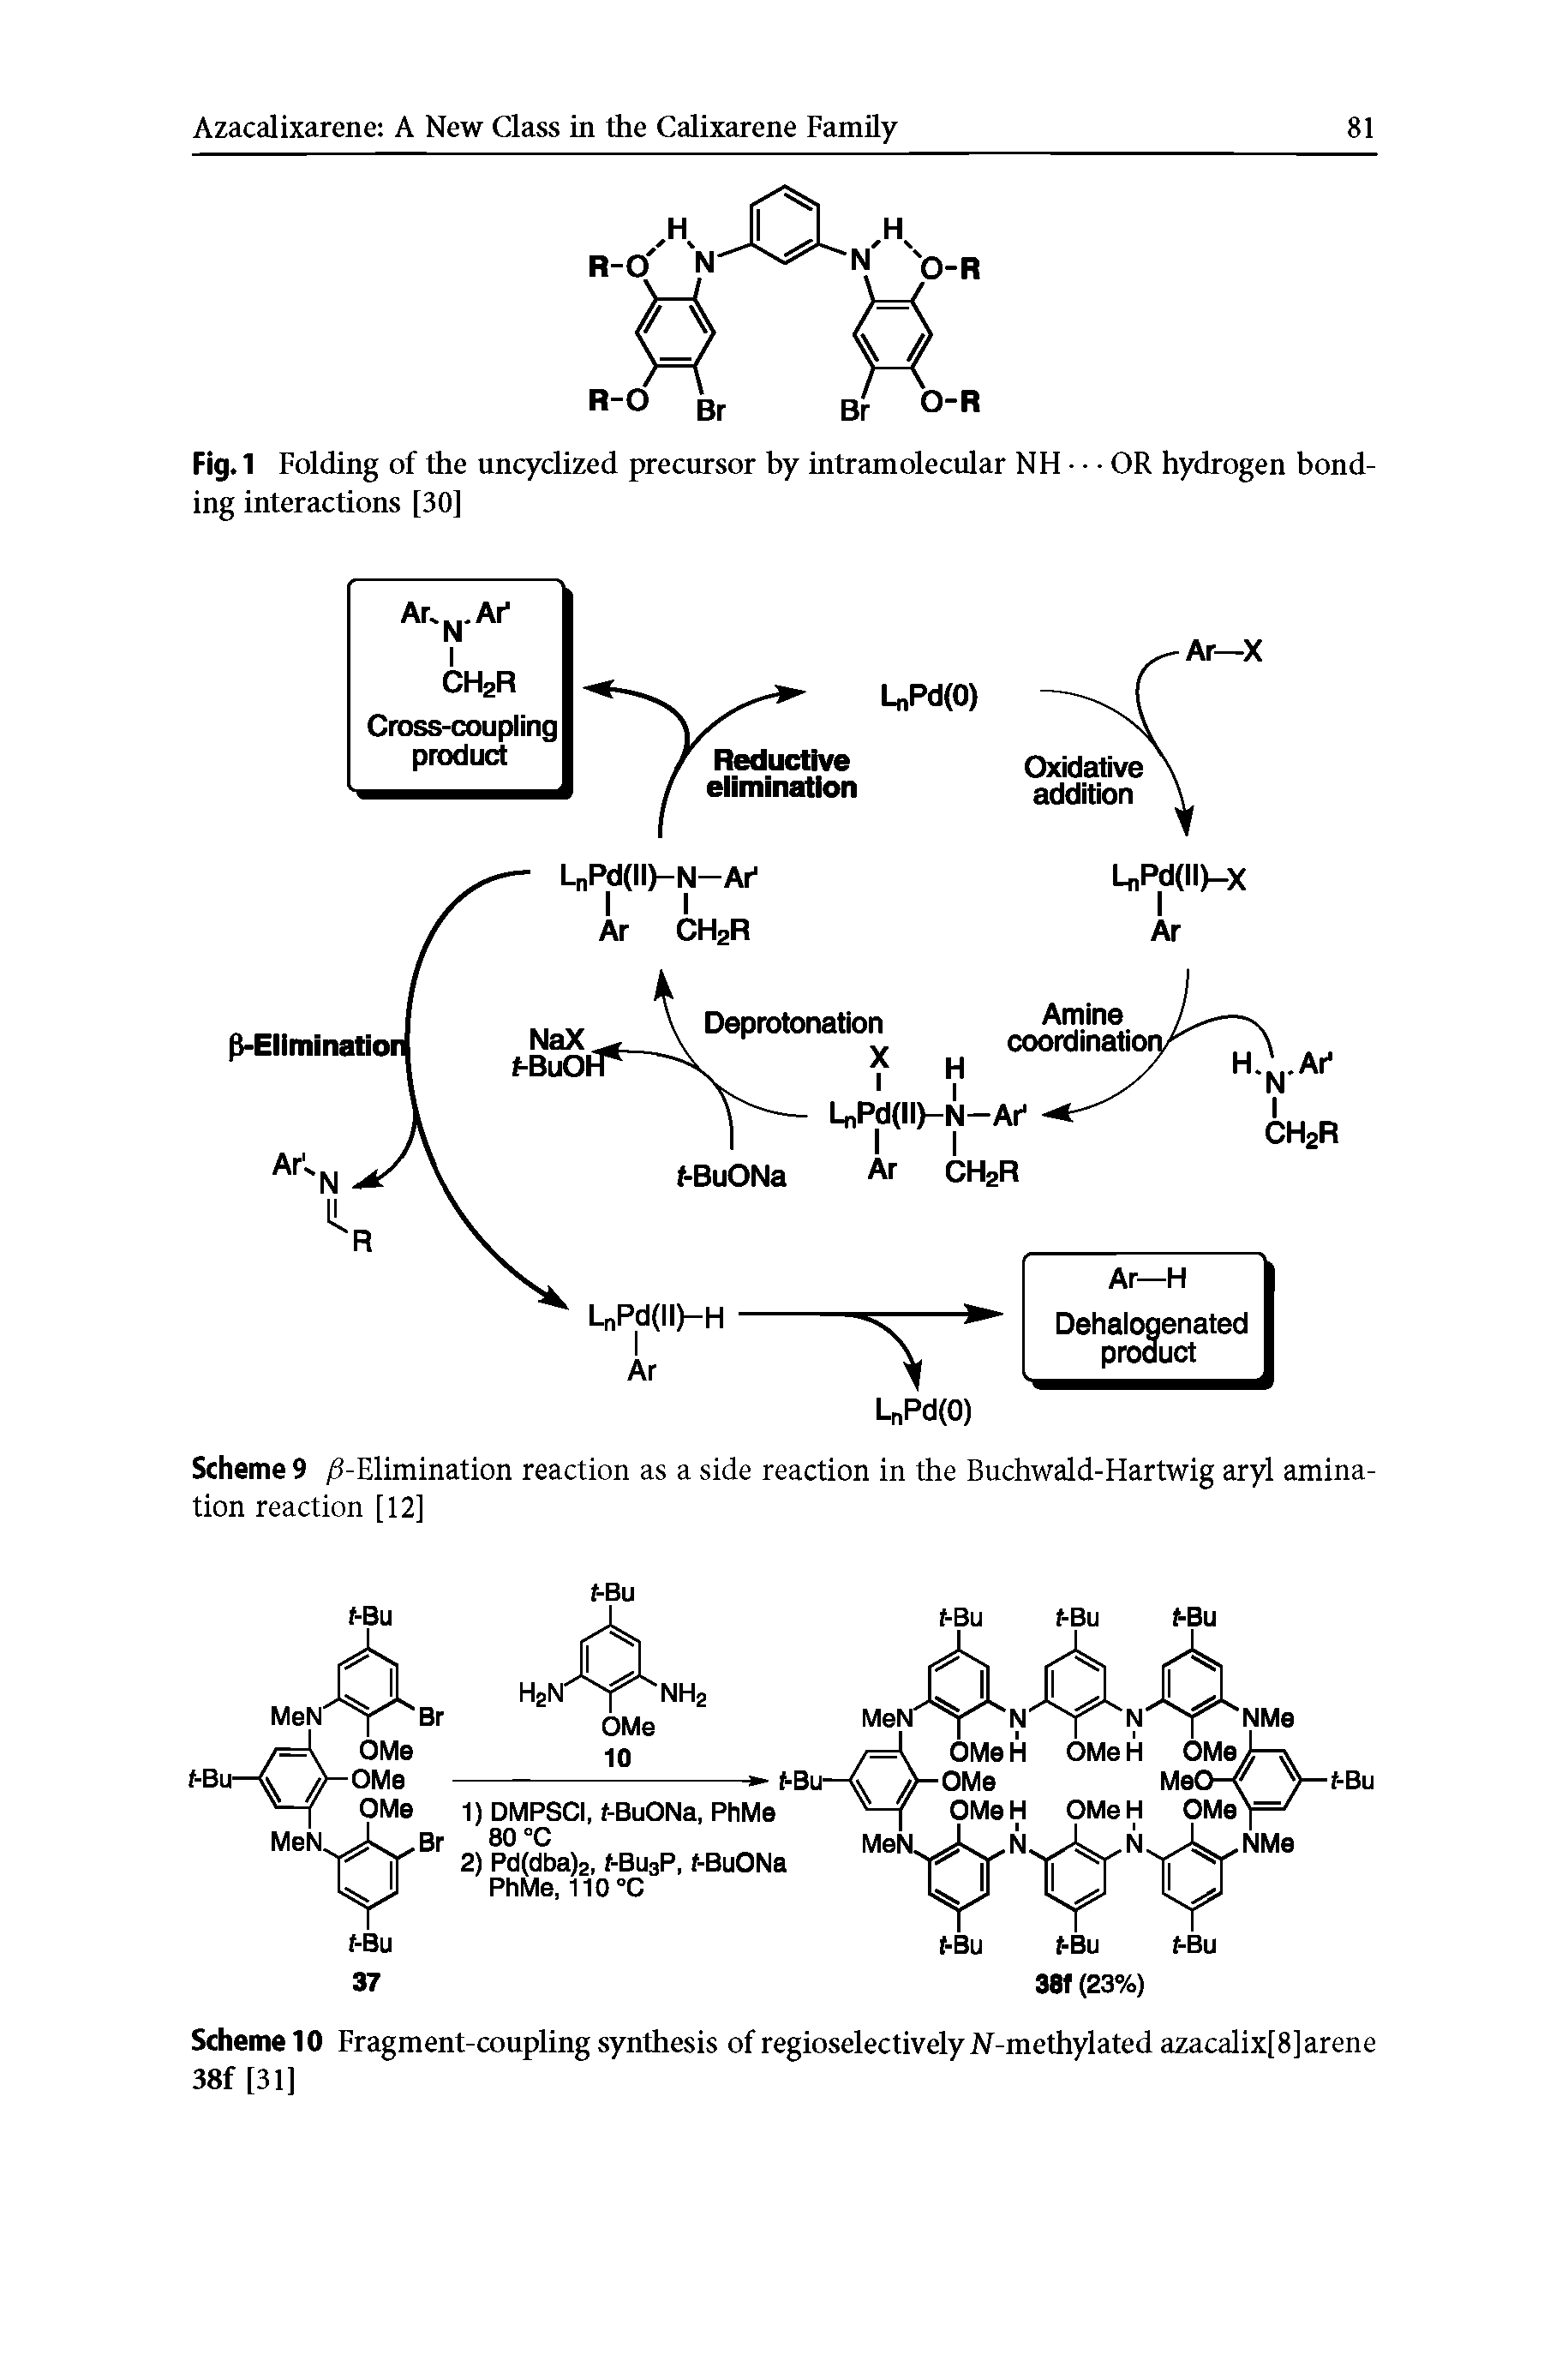 Scheme 9 8-Elimination reaction as a side reaction in the Buchwald-Hartwig aryl amina-tion reaction [12]...